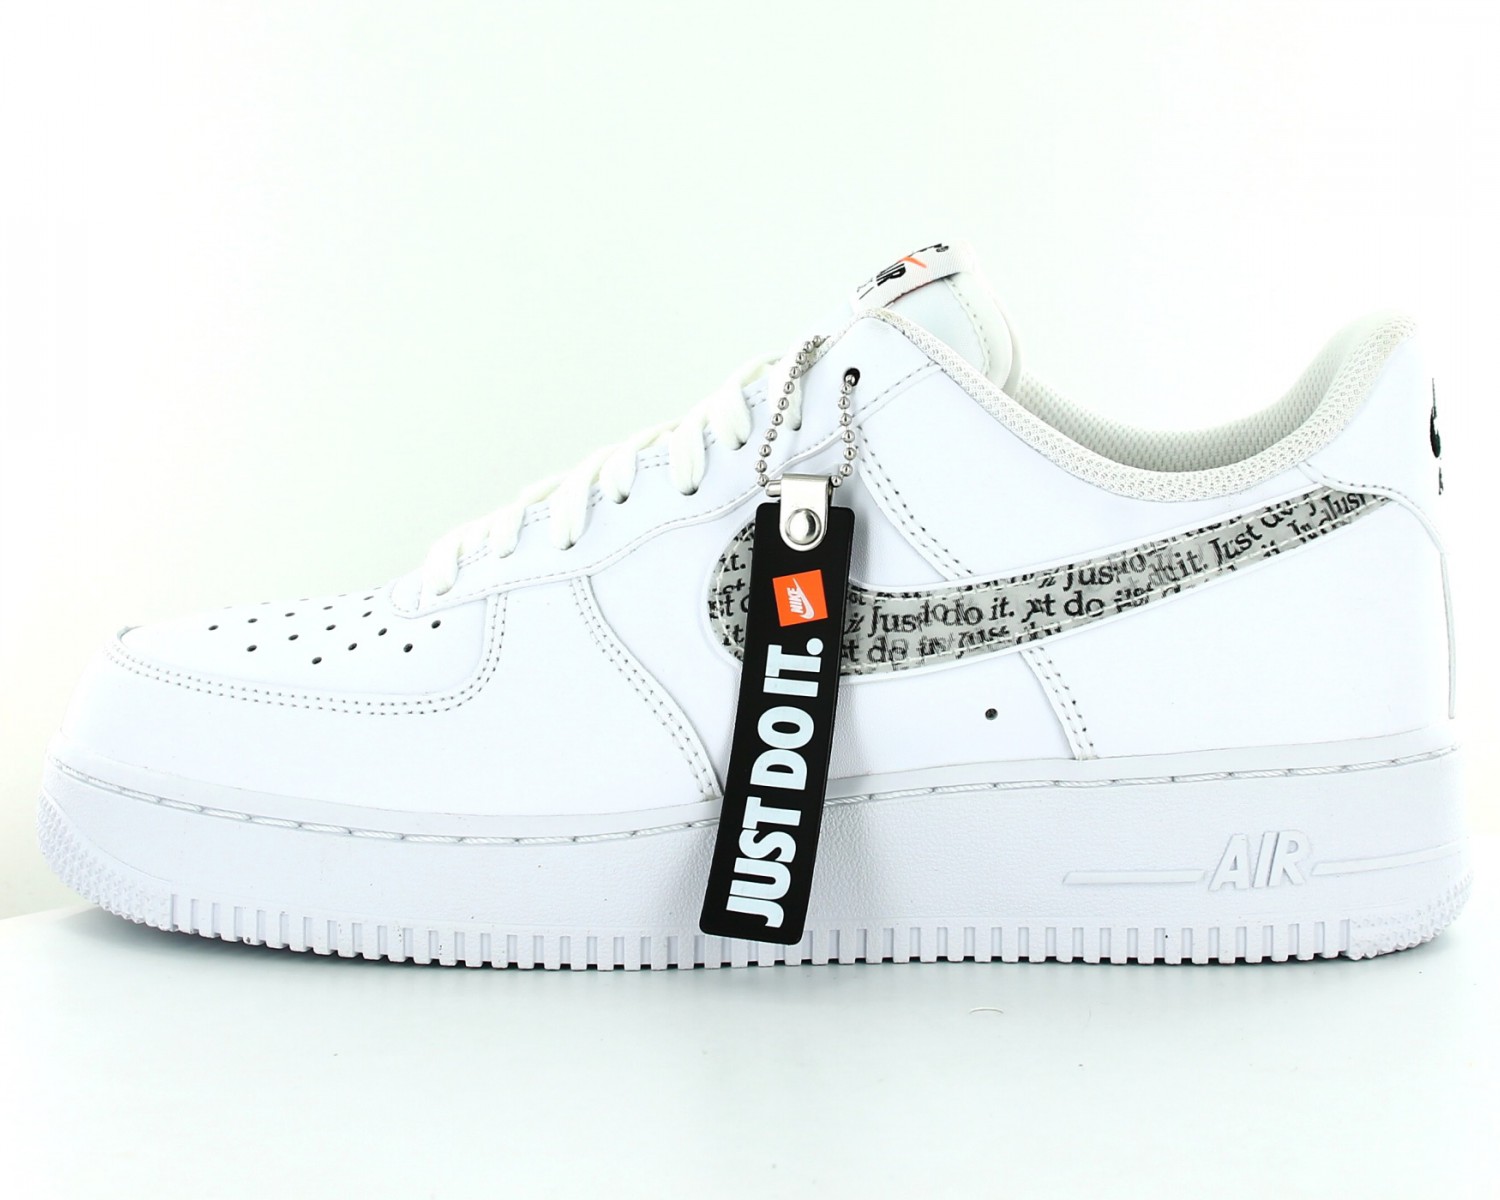 nike air force lv8 just do it